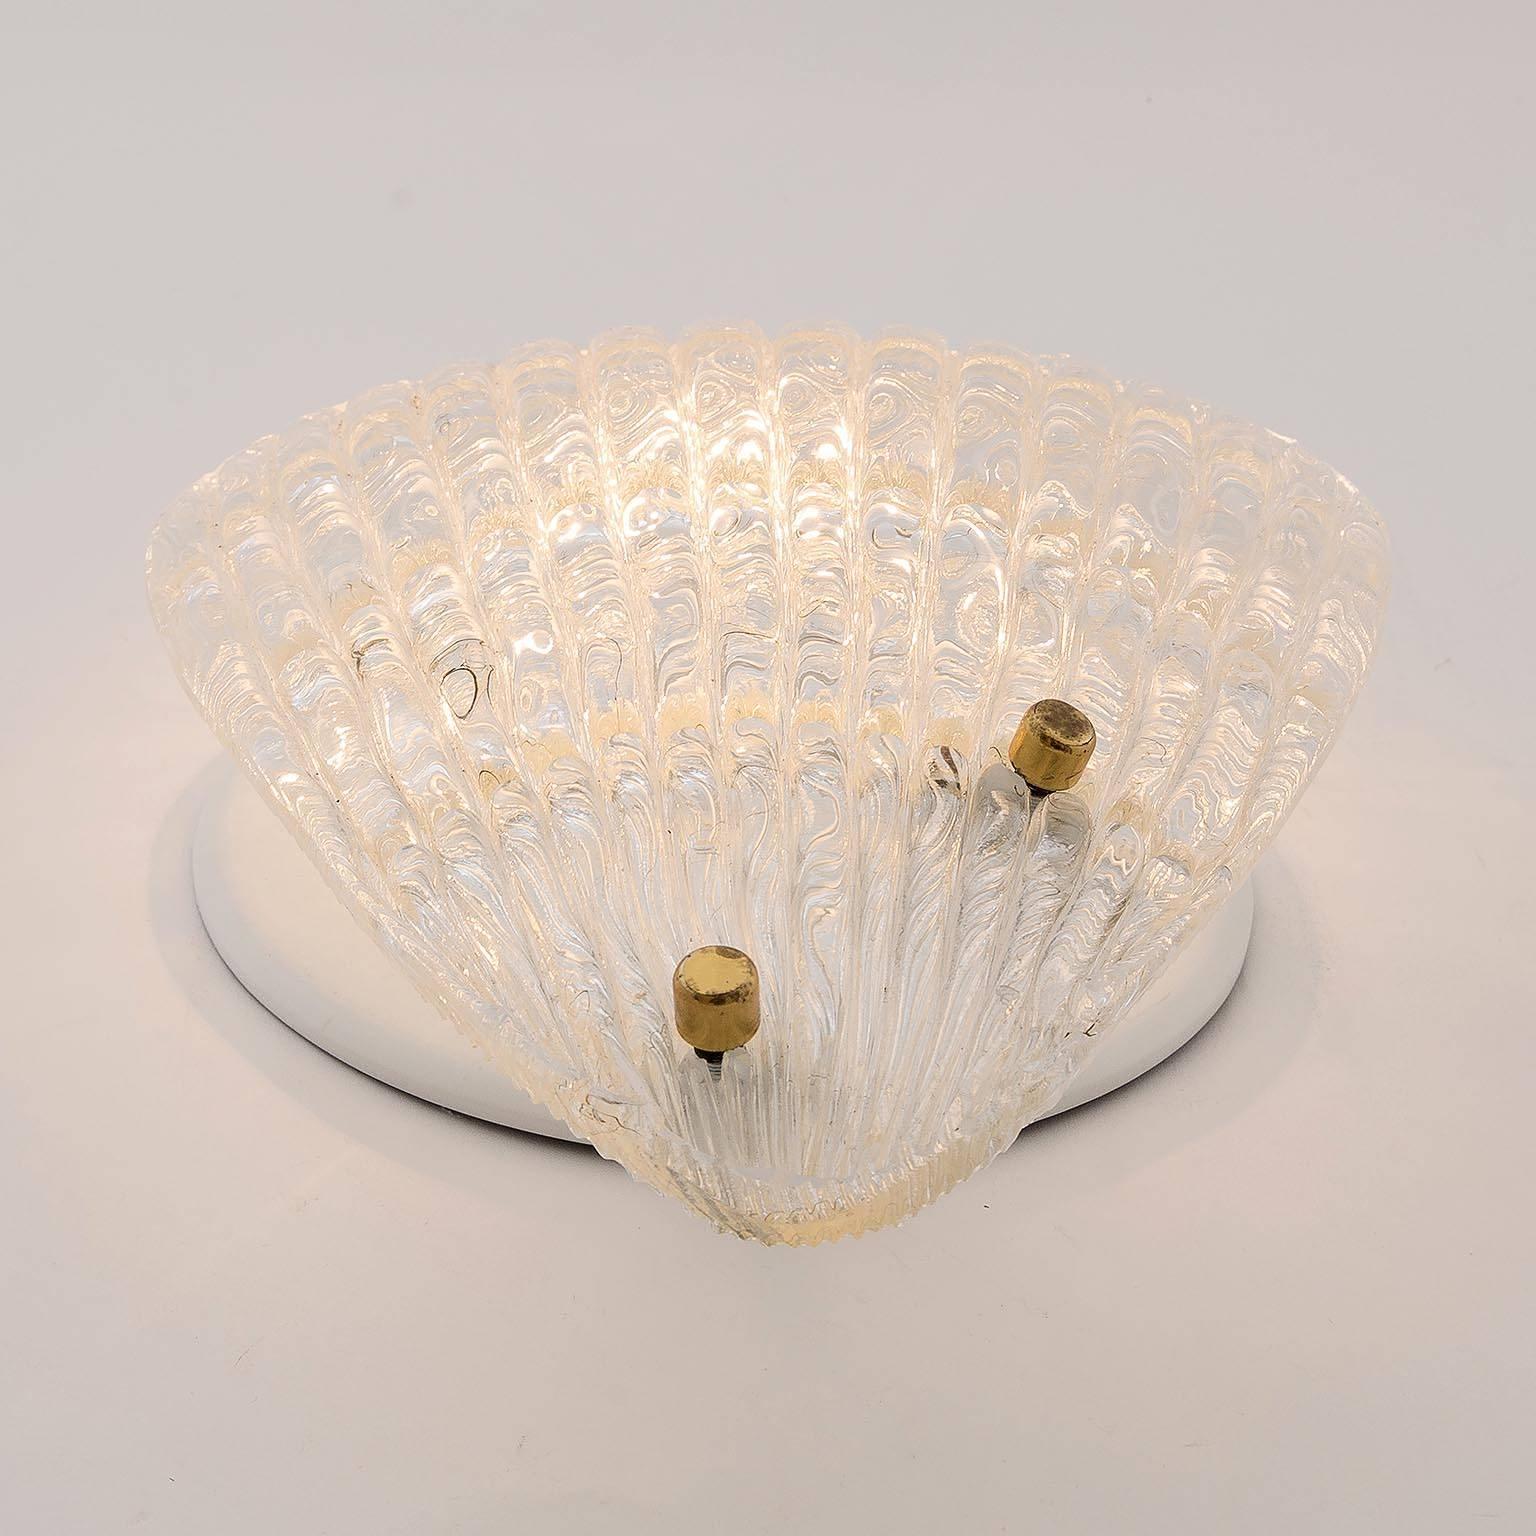 1 of 3 Shell Textured Glass Sconces Wall Lights by Rupert Nikoll, Vienna, 1950s For Sale 1